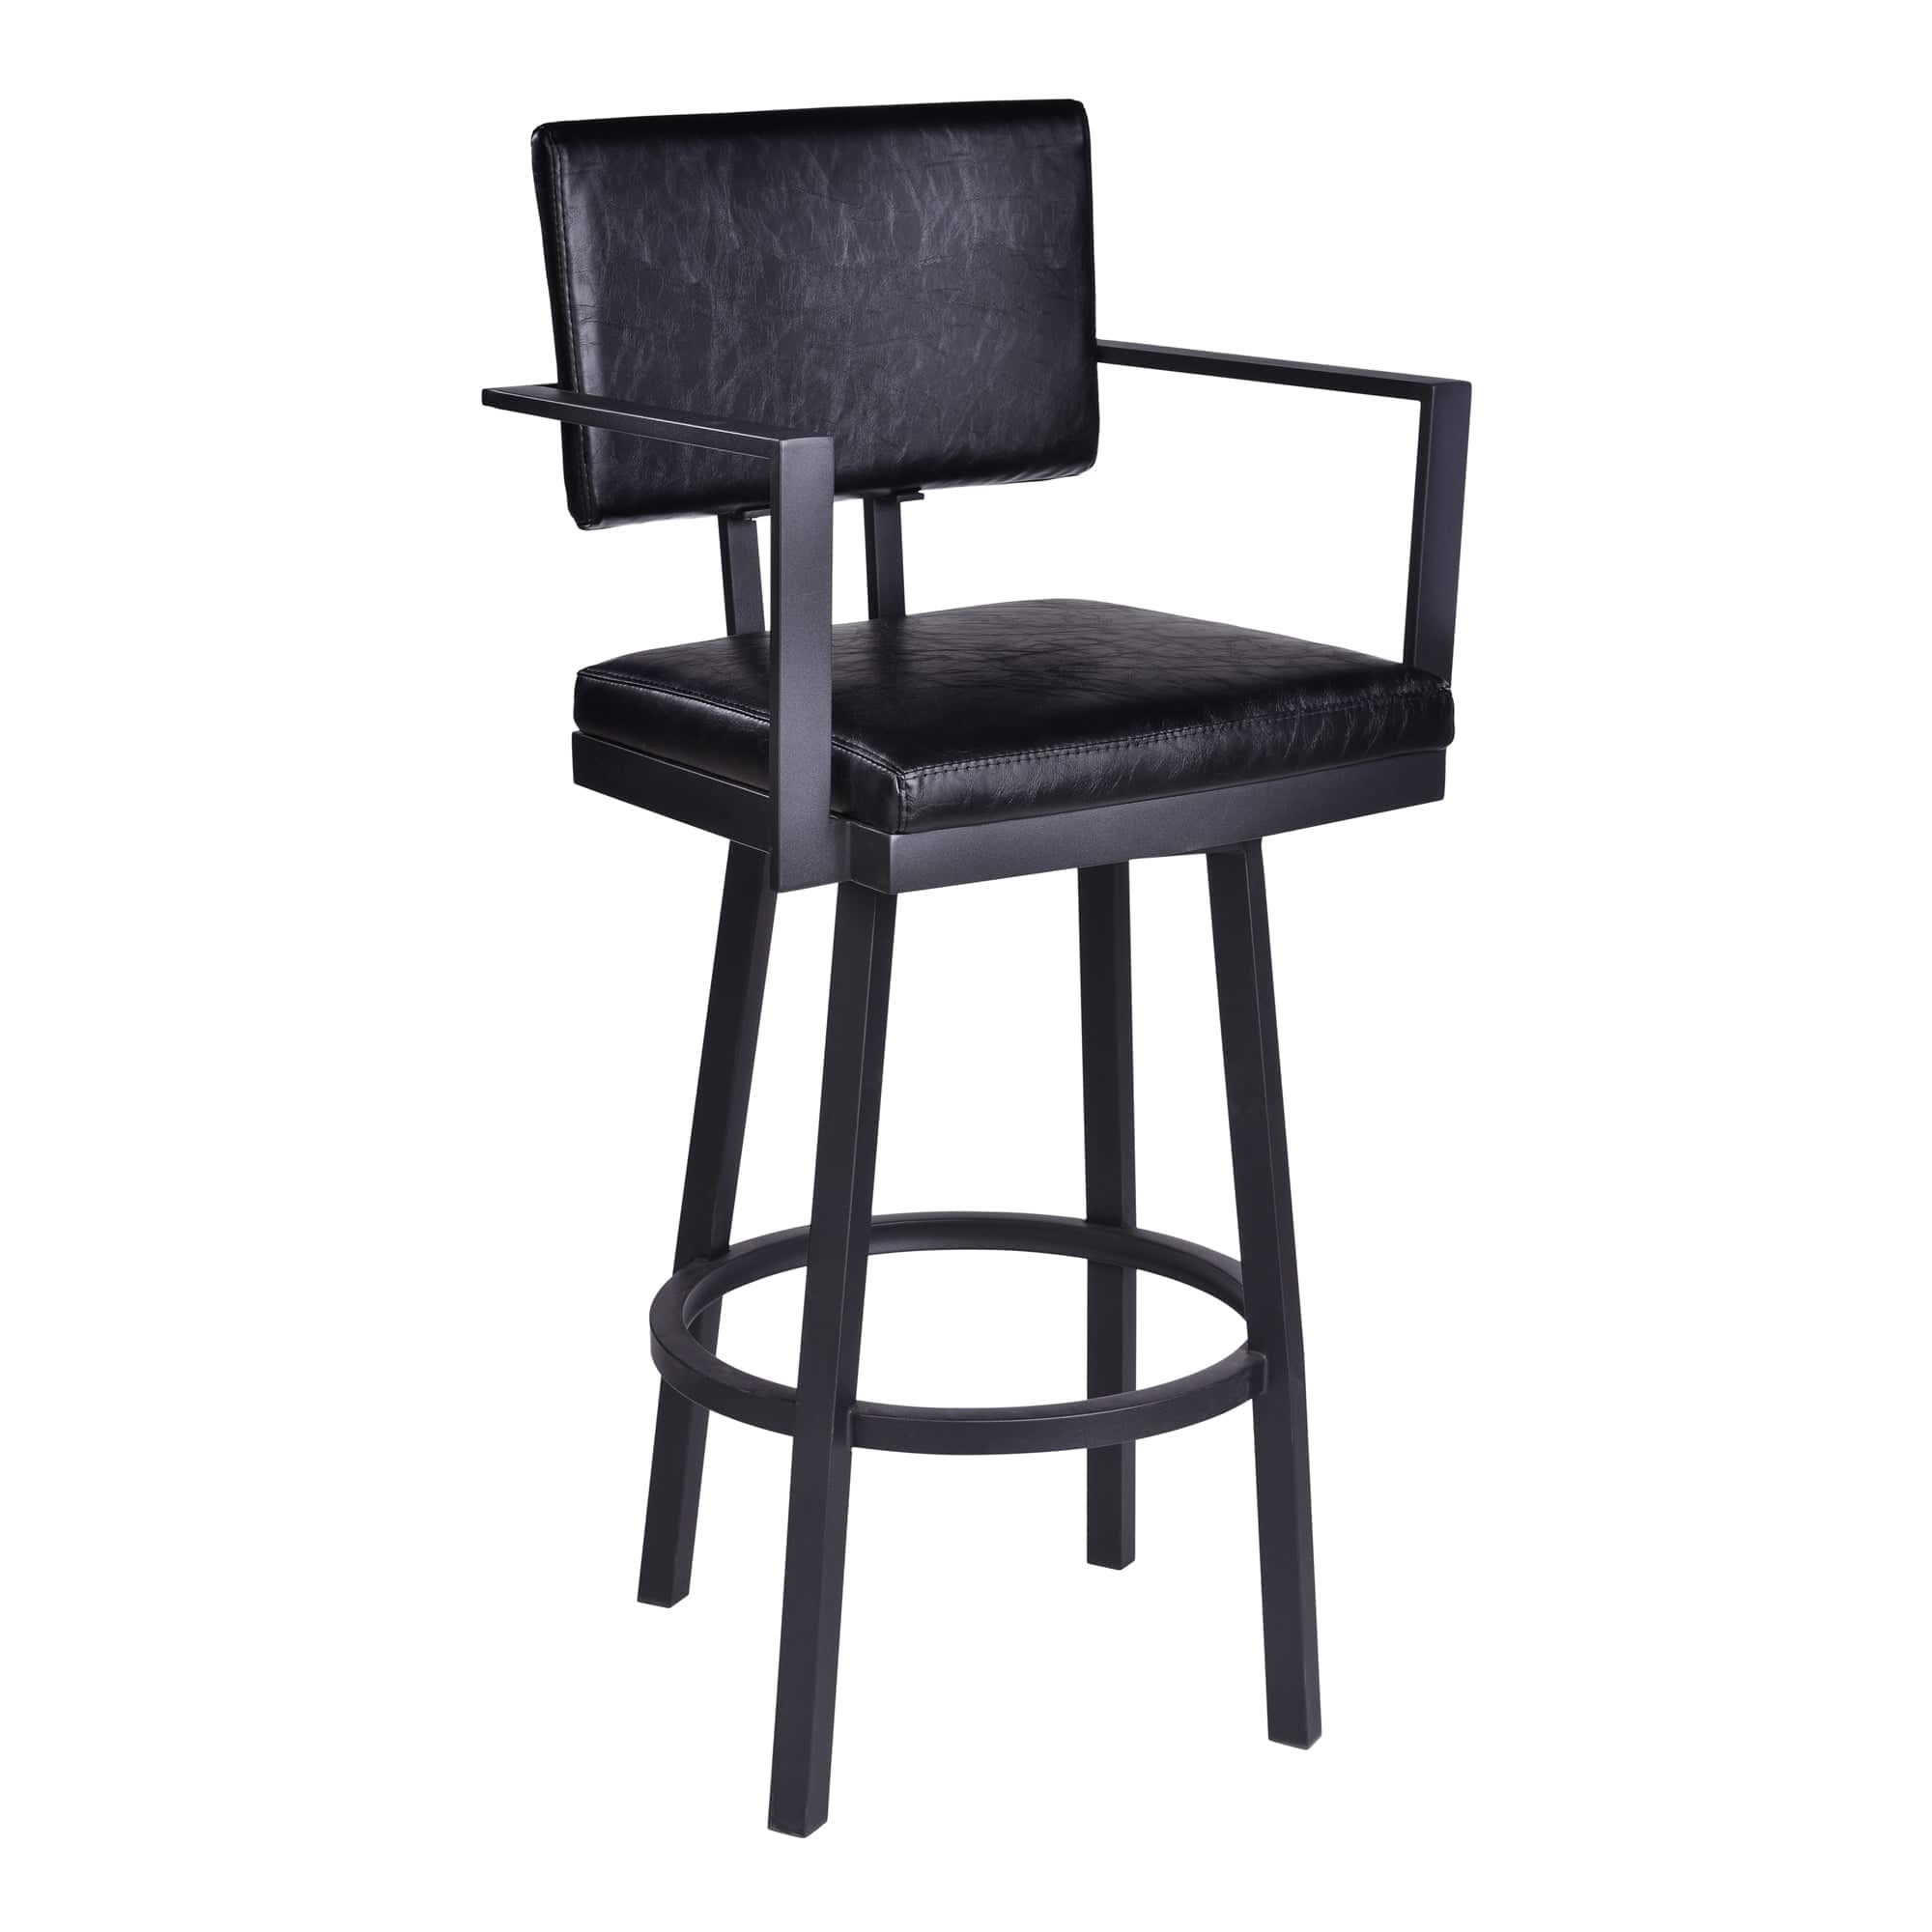 Armen Living Barstool Vintage Black Faux Leather and Metal Bar Stool with Arms Armen Living - Balboa 26" Counter Height Swivel Vintage Black Faux Leather and Metal Bar Stool | LCBBBABLVB26